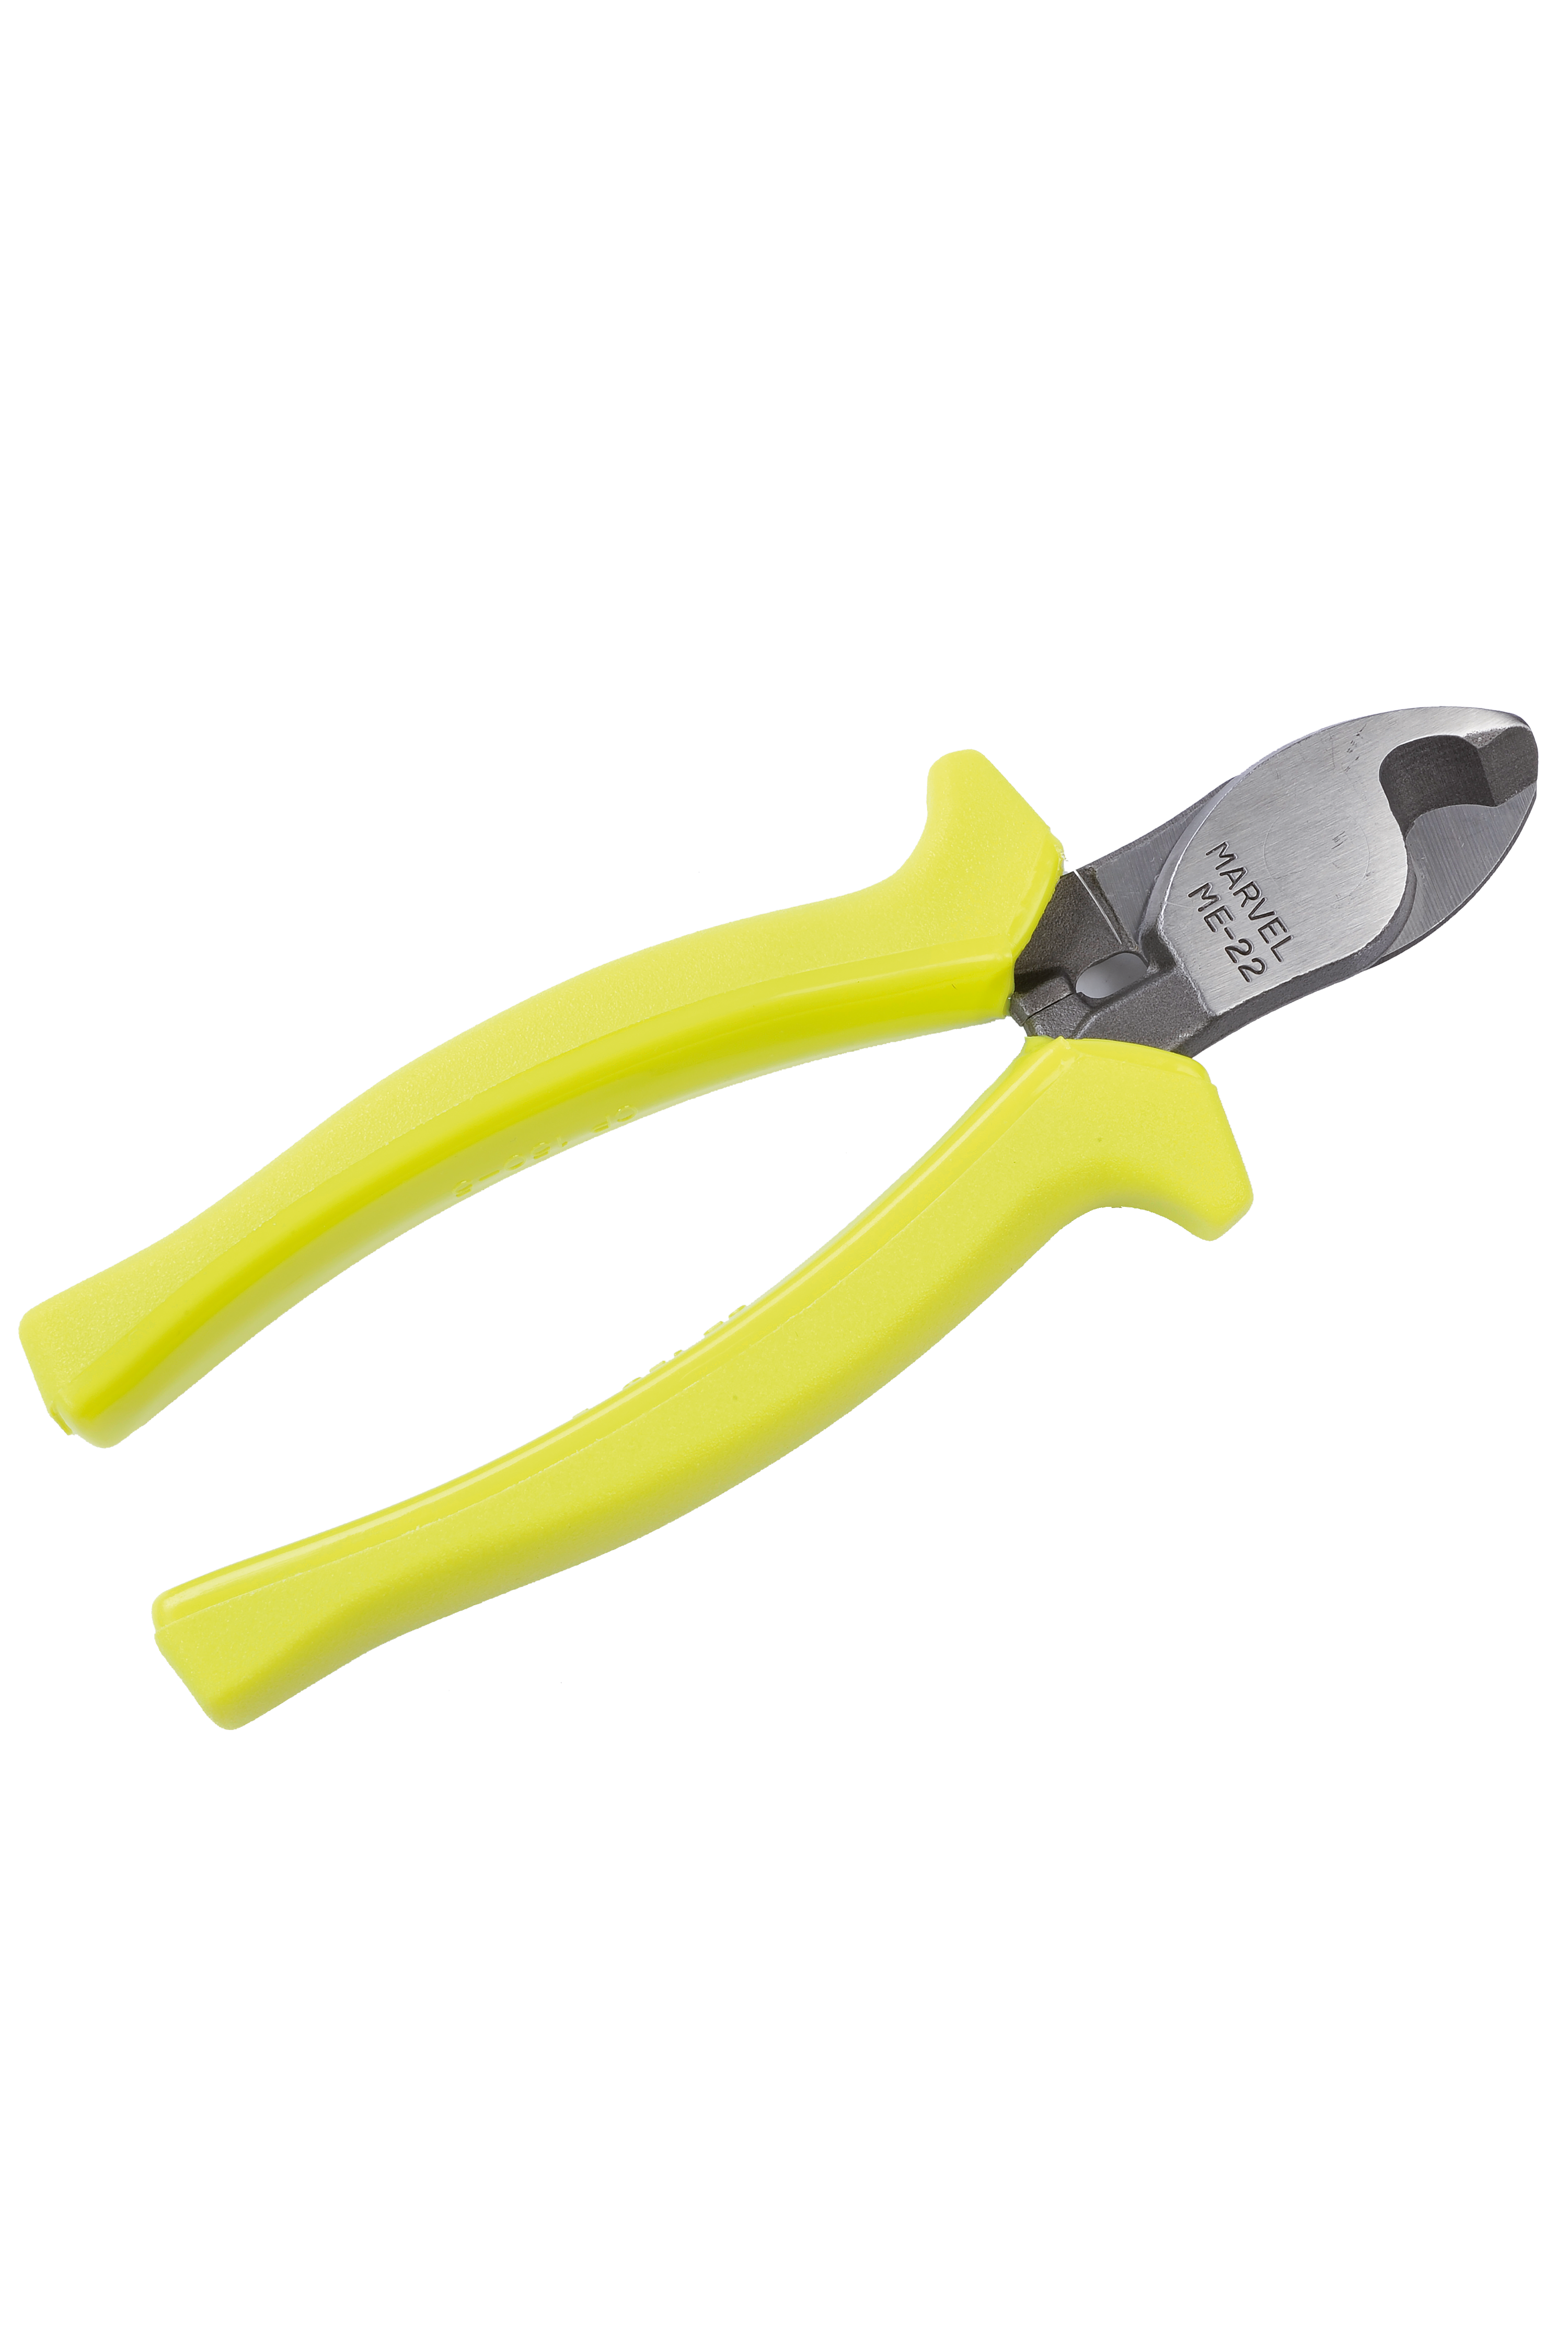 K2 Cable Cutter